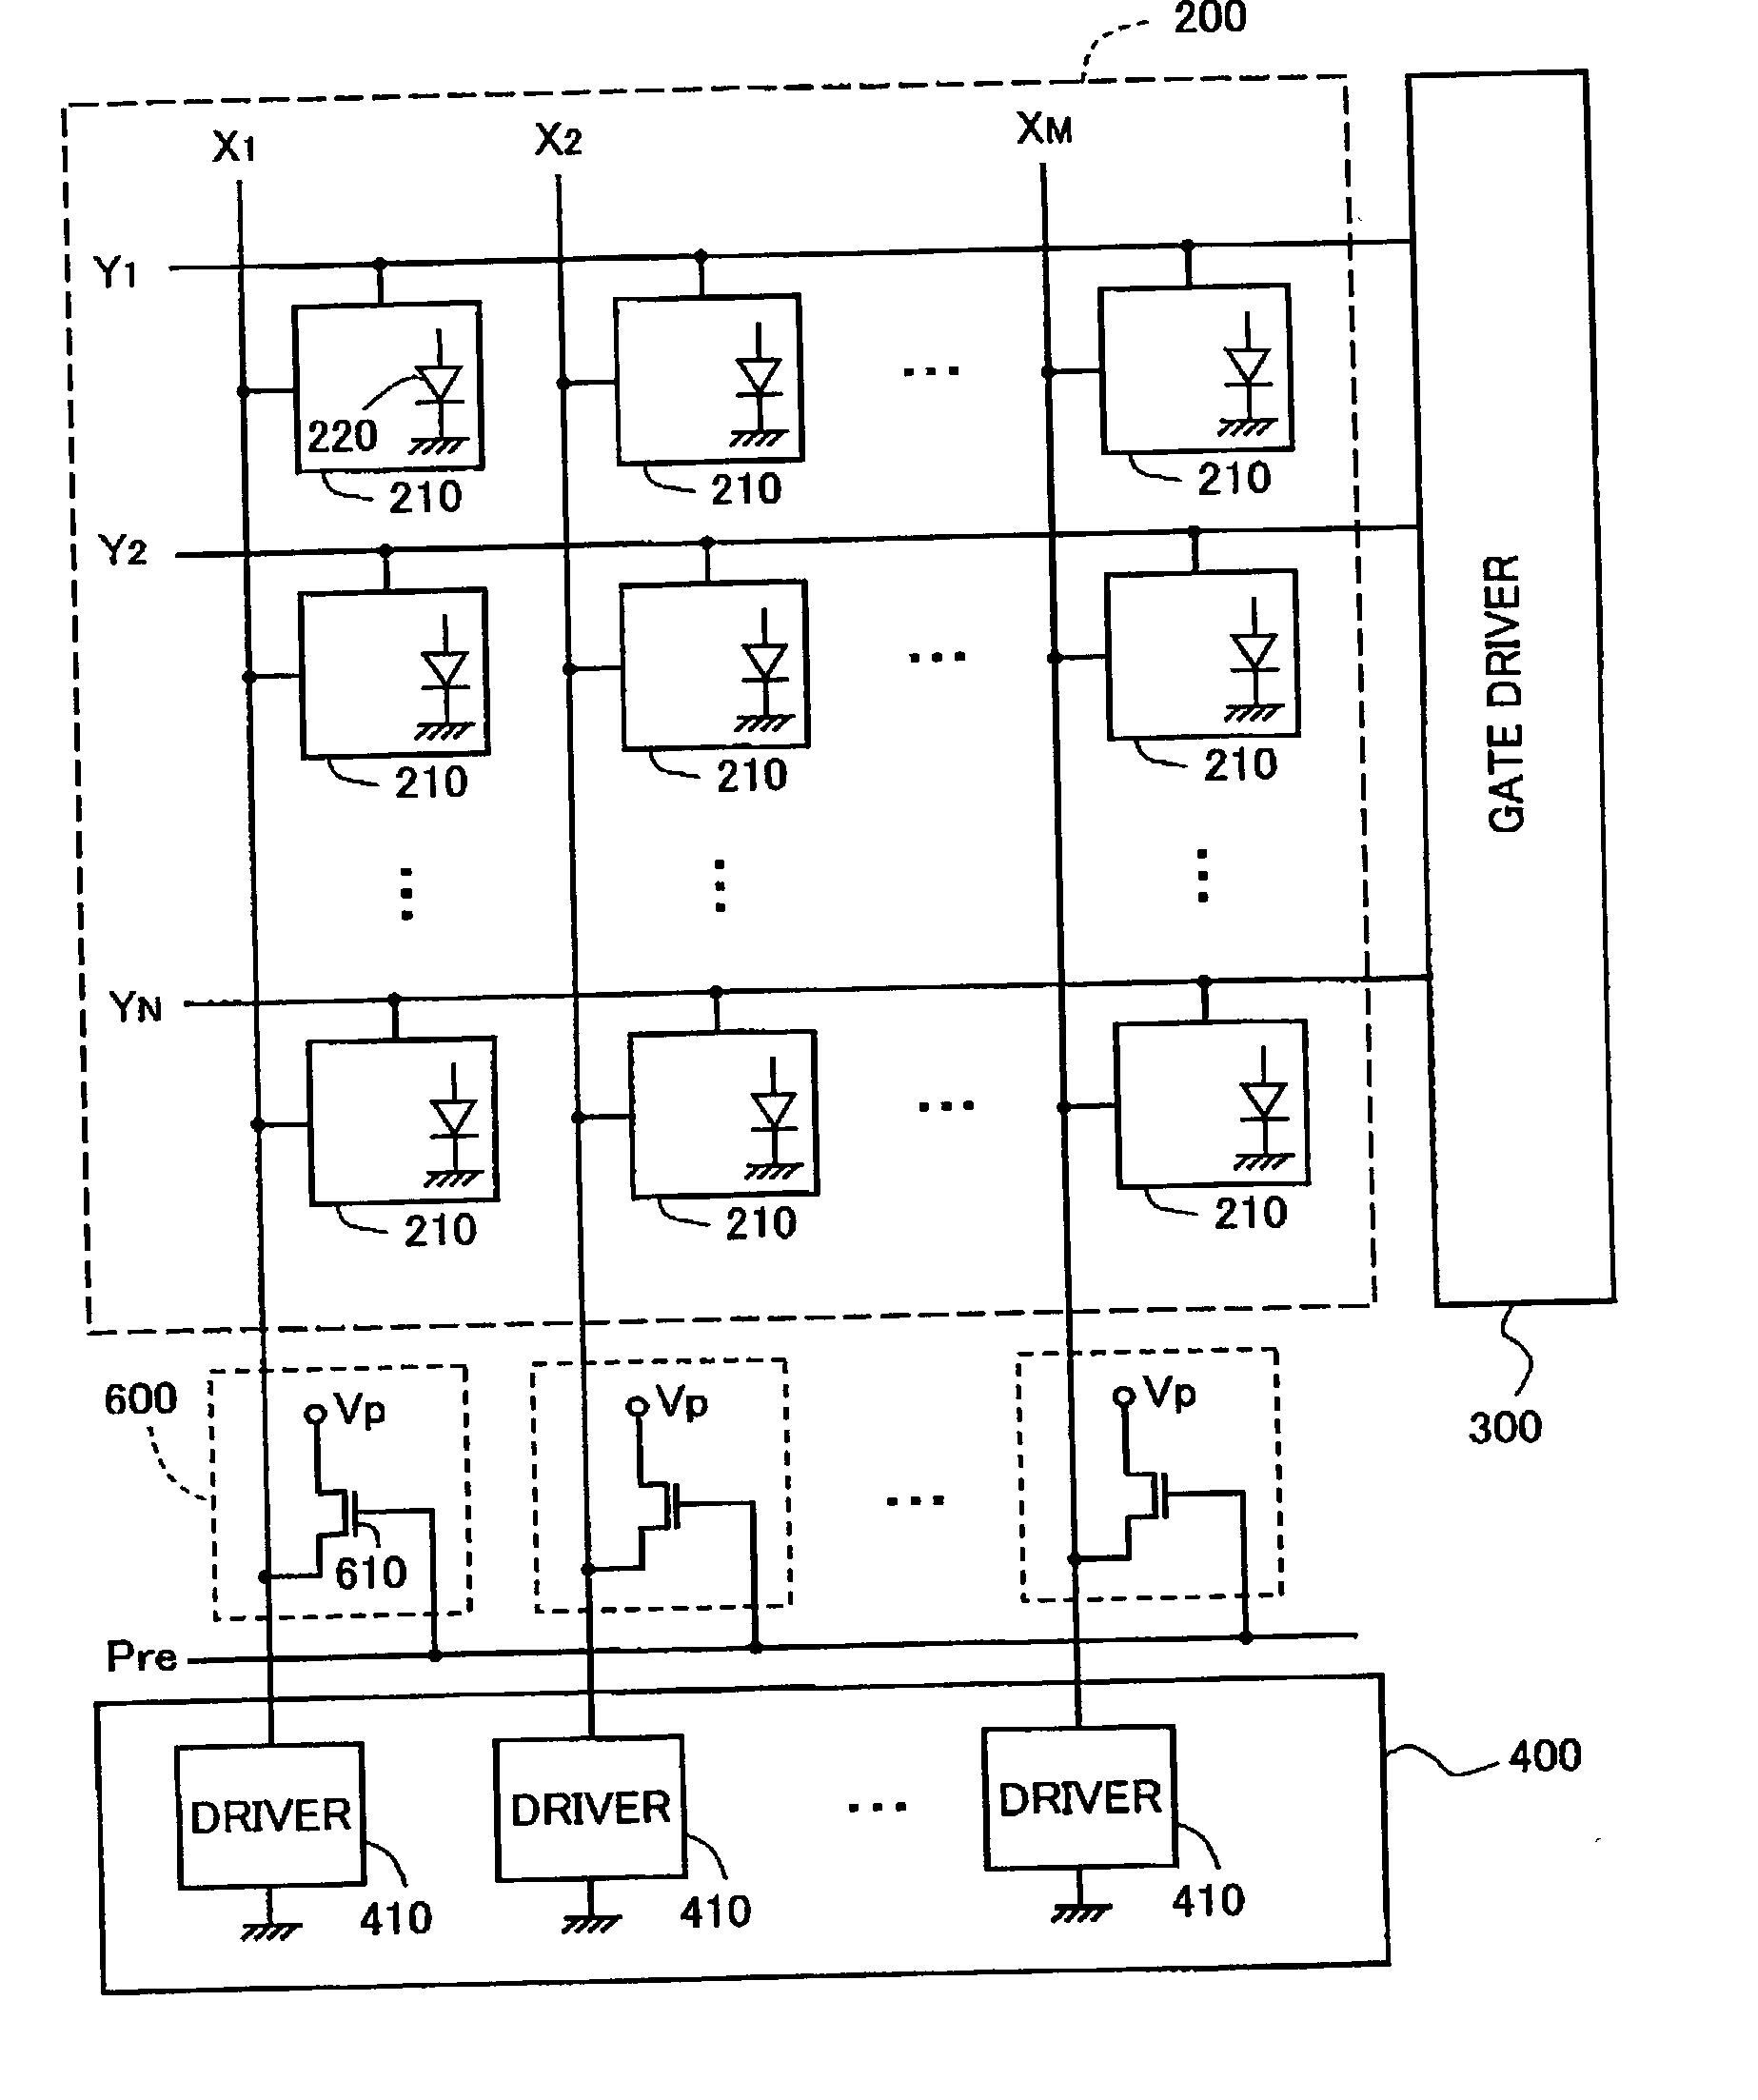 Driving of data lines used in unit circuit control